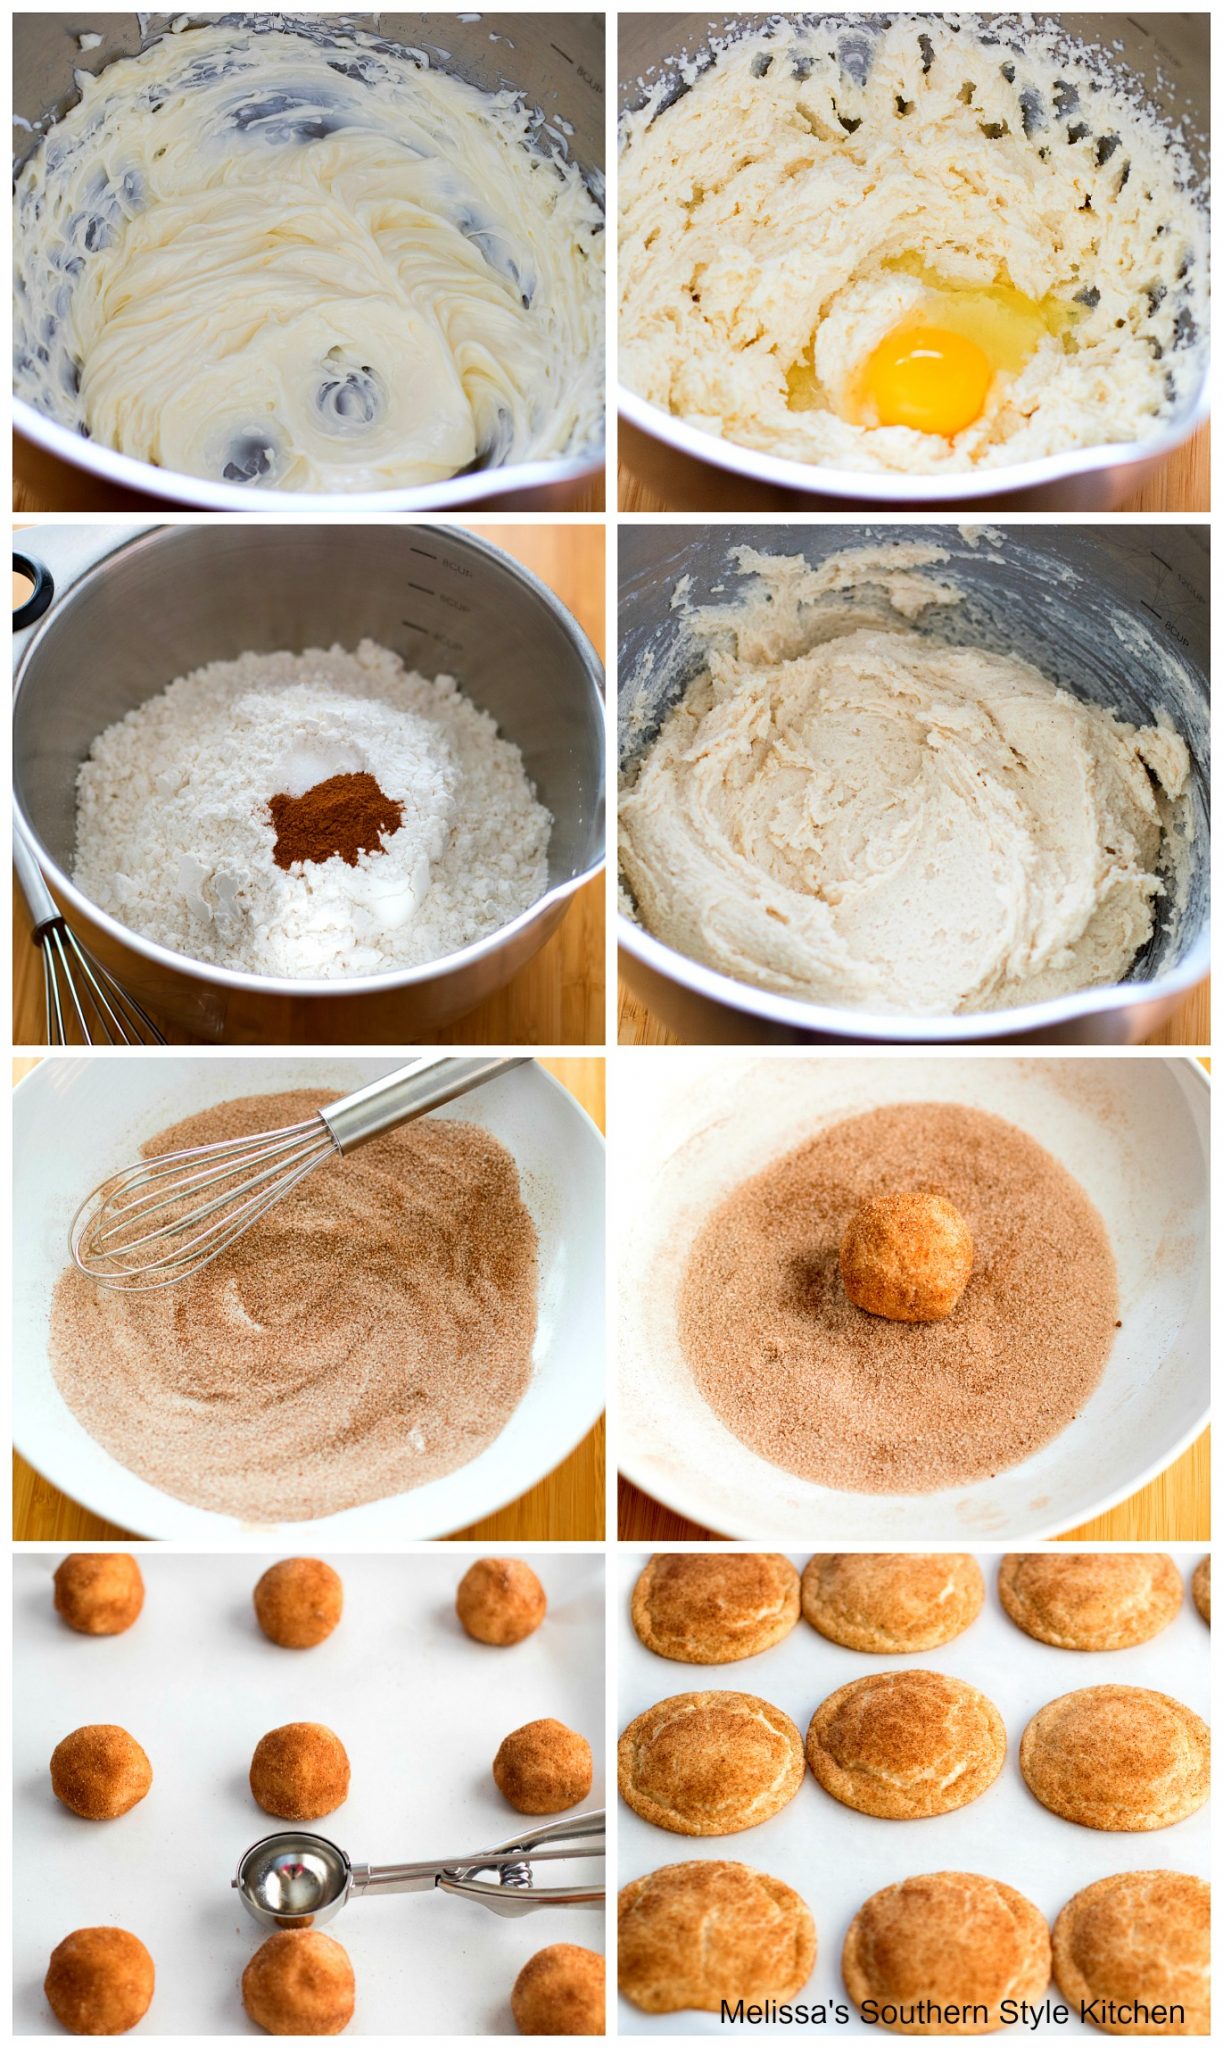 step-by-step preparation images, cookie dough in a mixing bowl and baked cookies